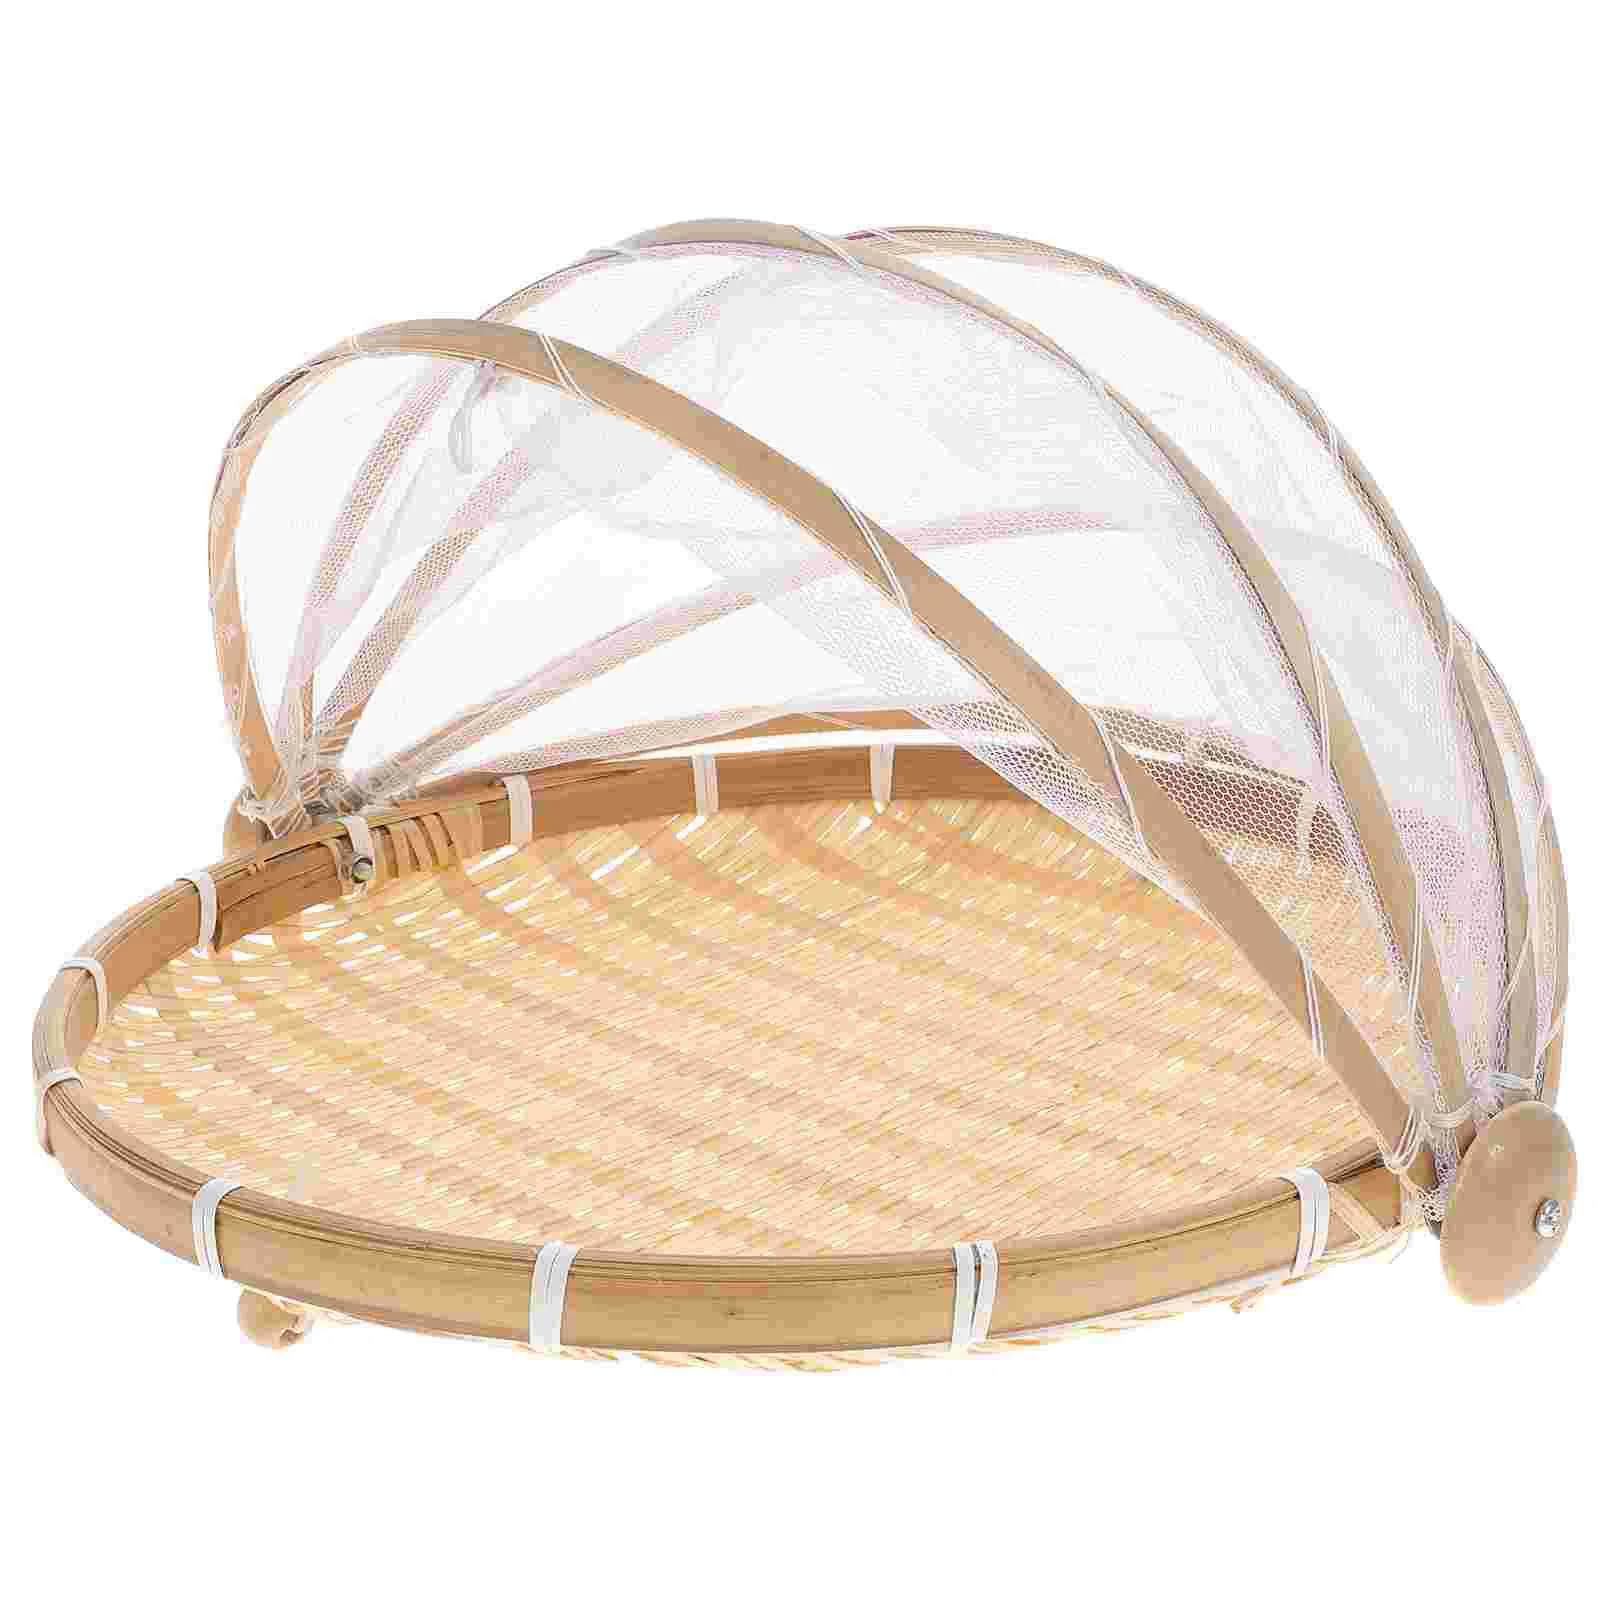 

Net Cover Bamboo Basket Multi-purpose Dustpan Steamed Bun Ware Woven Manual Household Craft Food Drying Round Tray